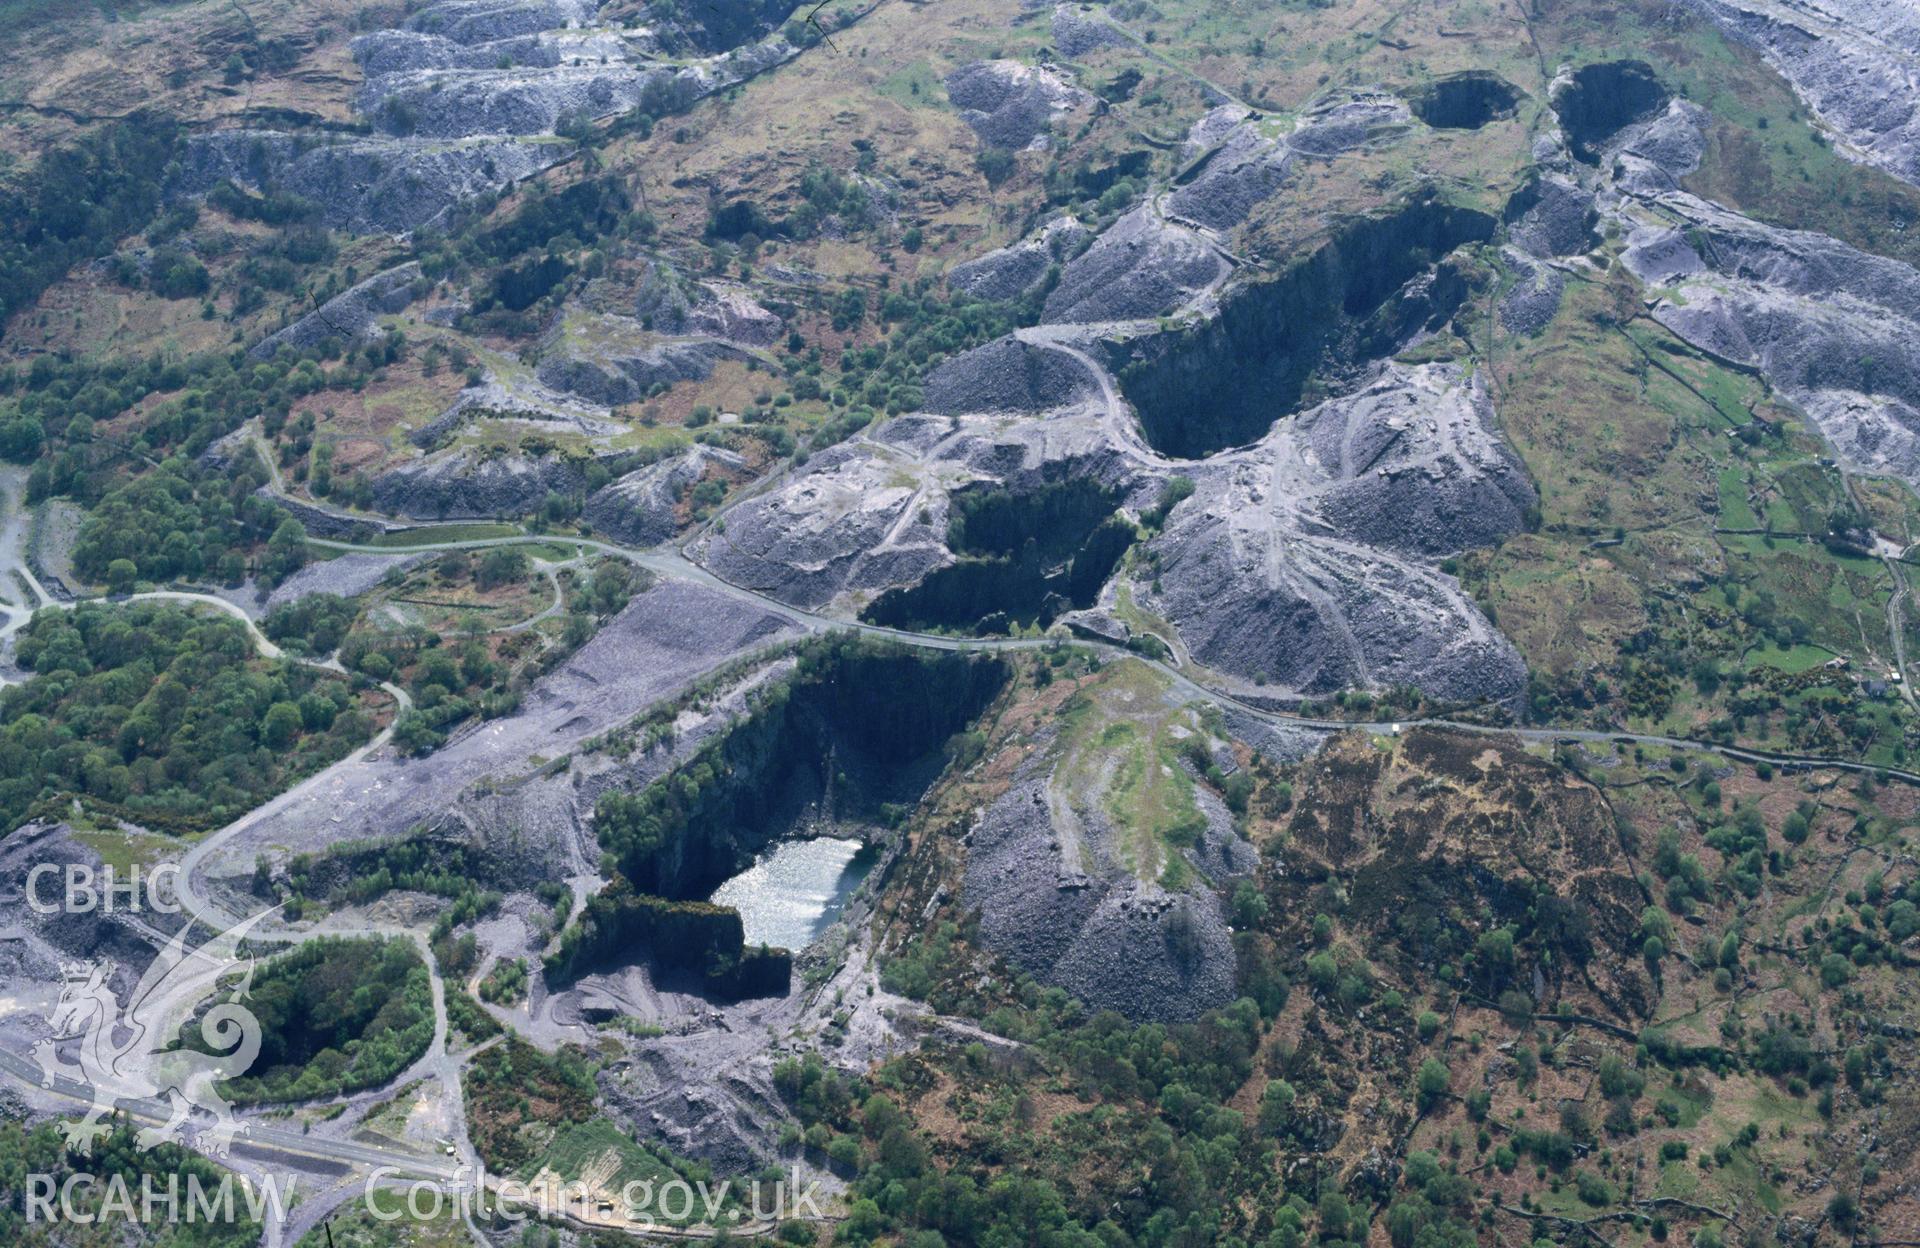 Slide of RCAHMW colour oblique aerial photograph of Glyn Rhonwy Quarry, taken by C.R. Musson, 2/5/1994.